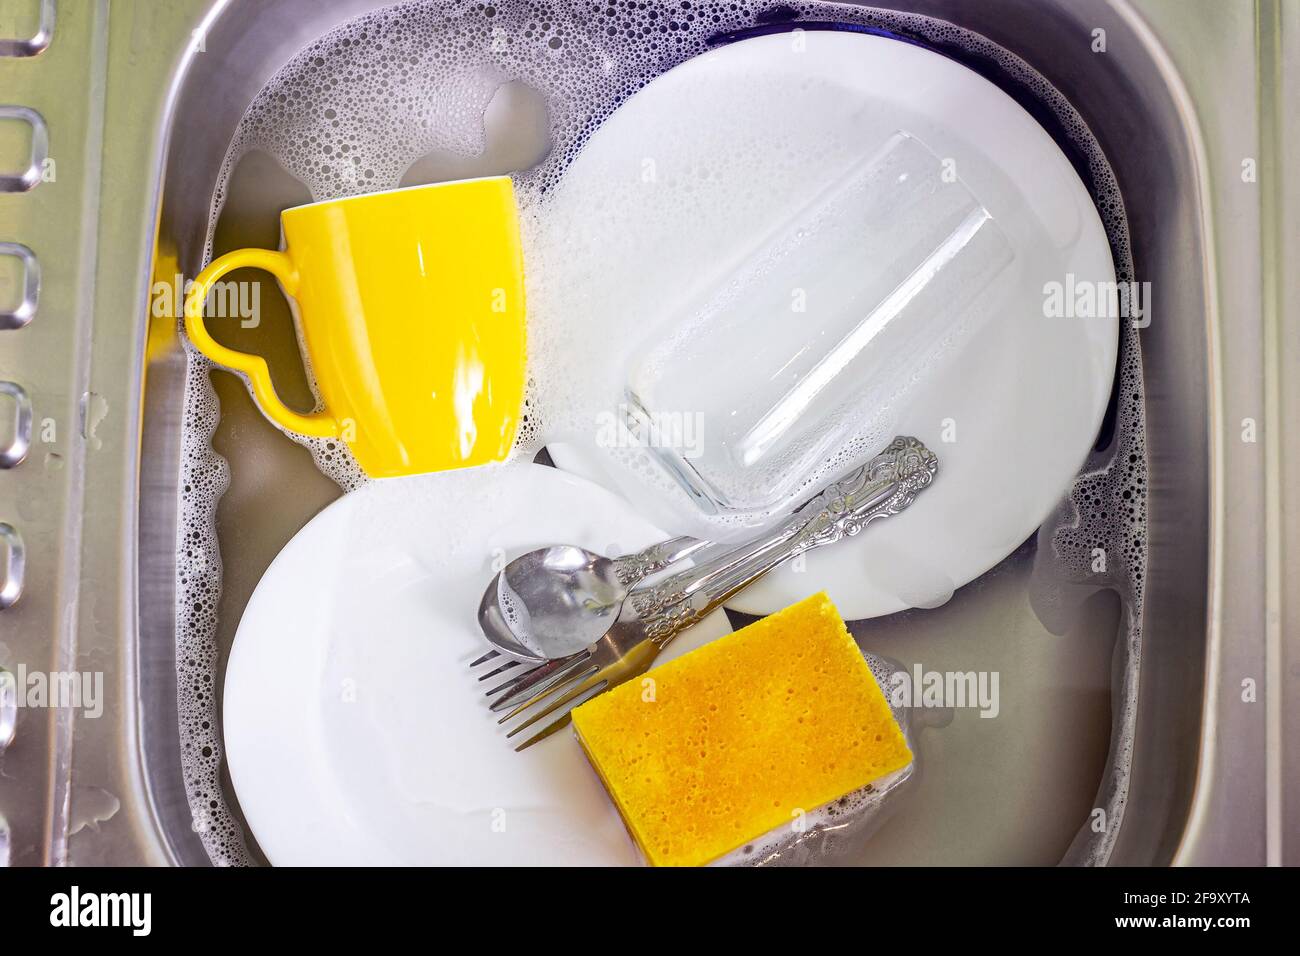 Metal sink in the kitchen full of dirty dishware stack. Housework, washing dishes, household duties concept. Stock Photo